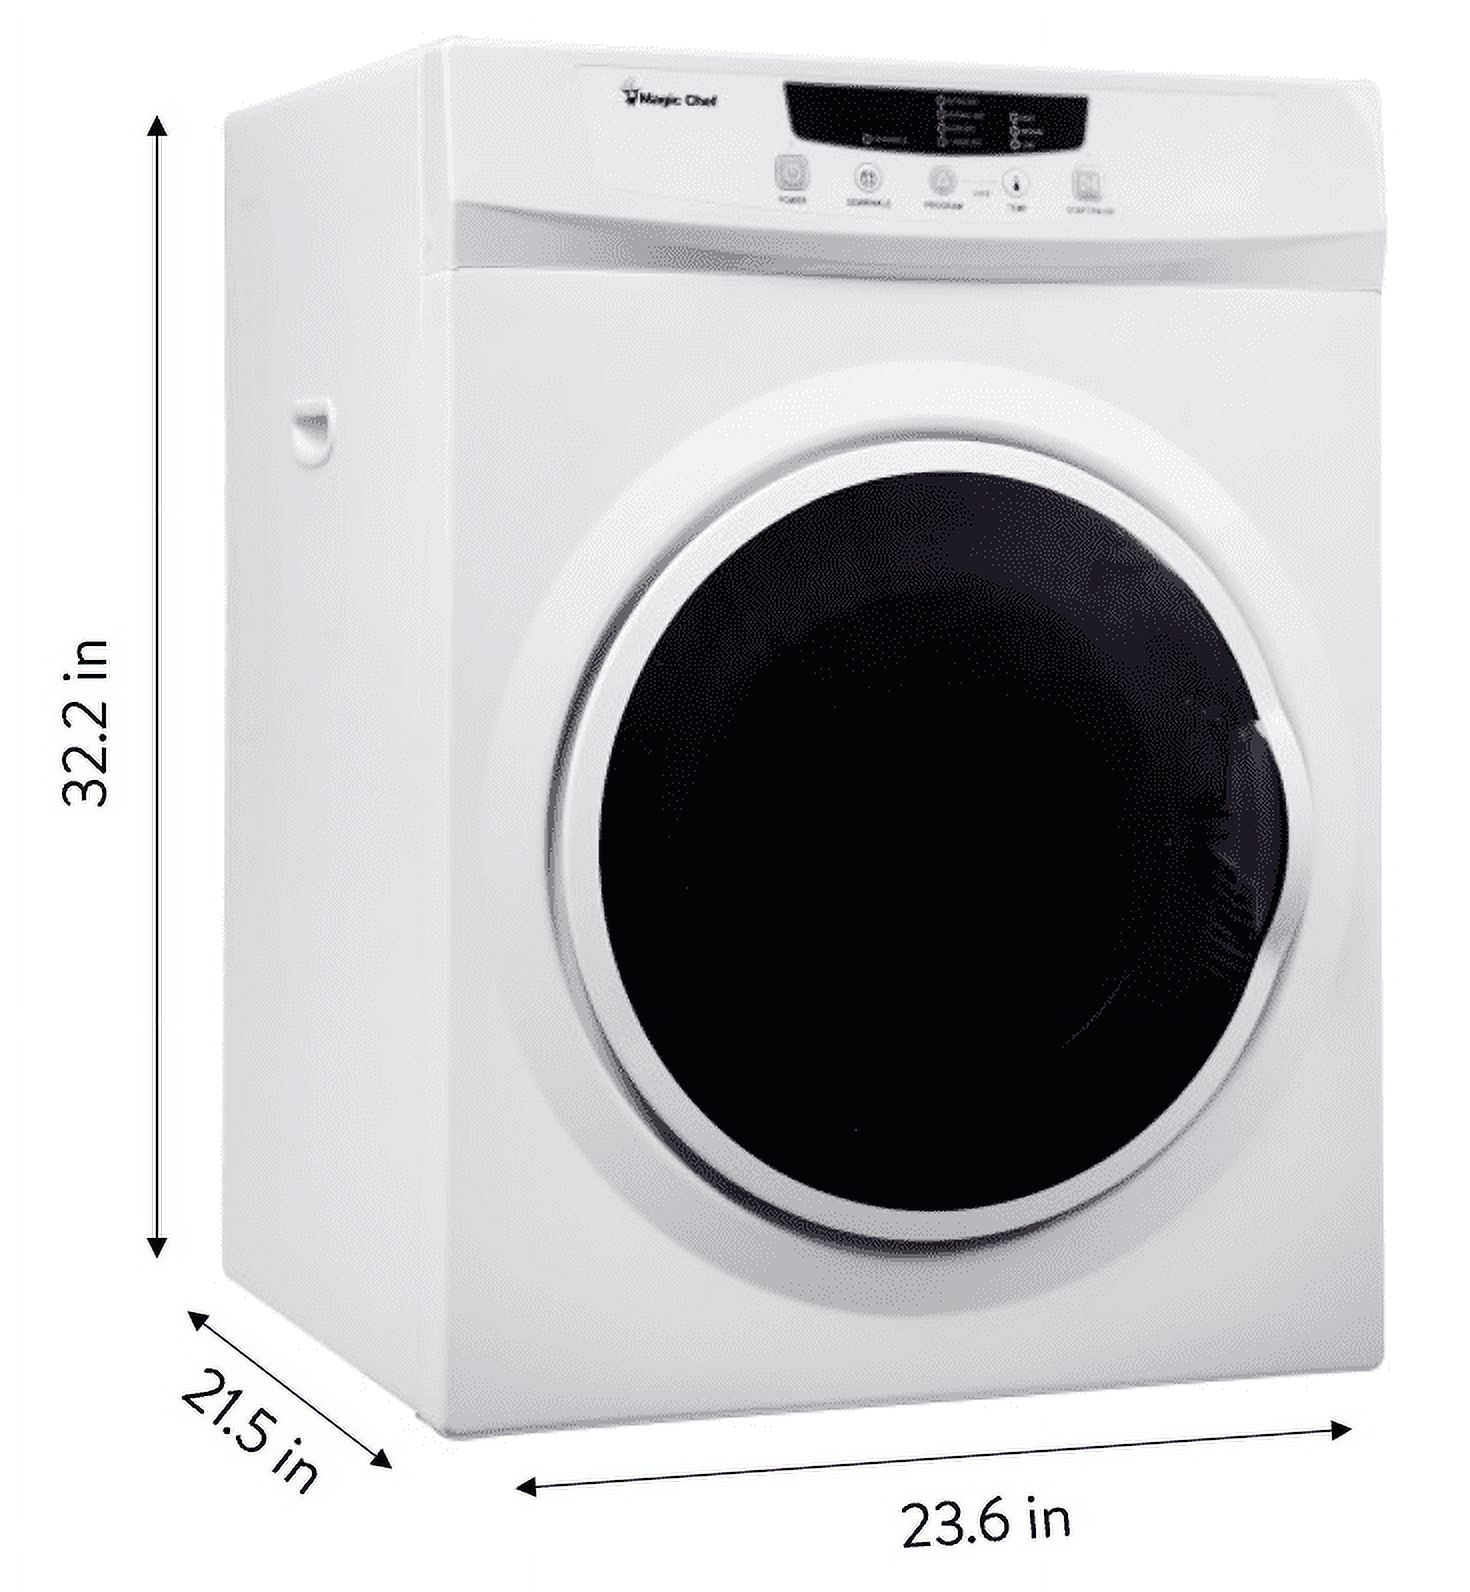 Magic Chef 3.5 cu. ft. Compact Electric Dryer, White - image 3 of 7